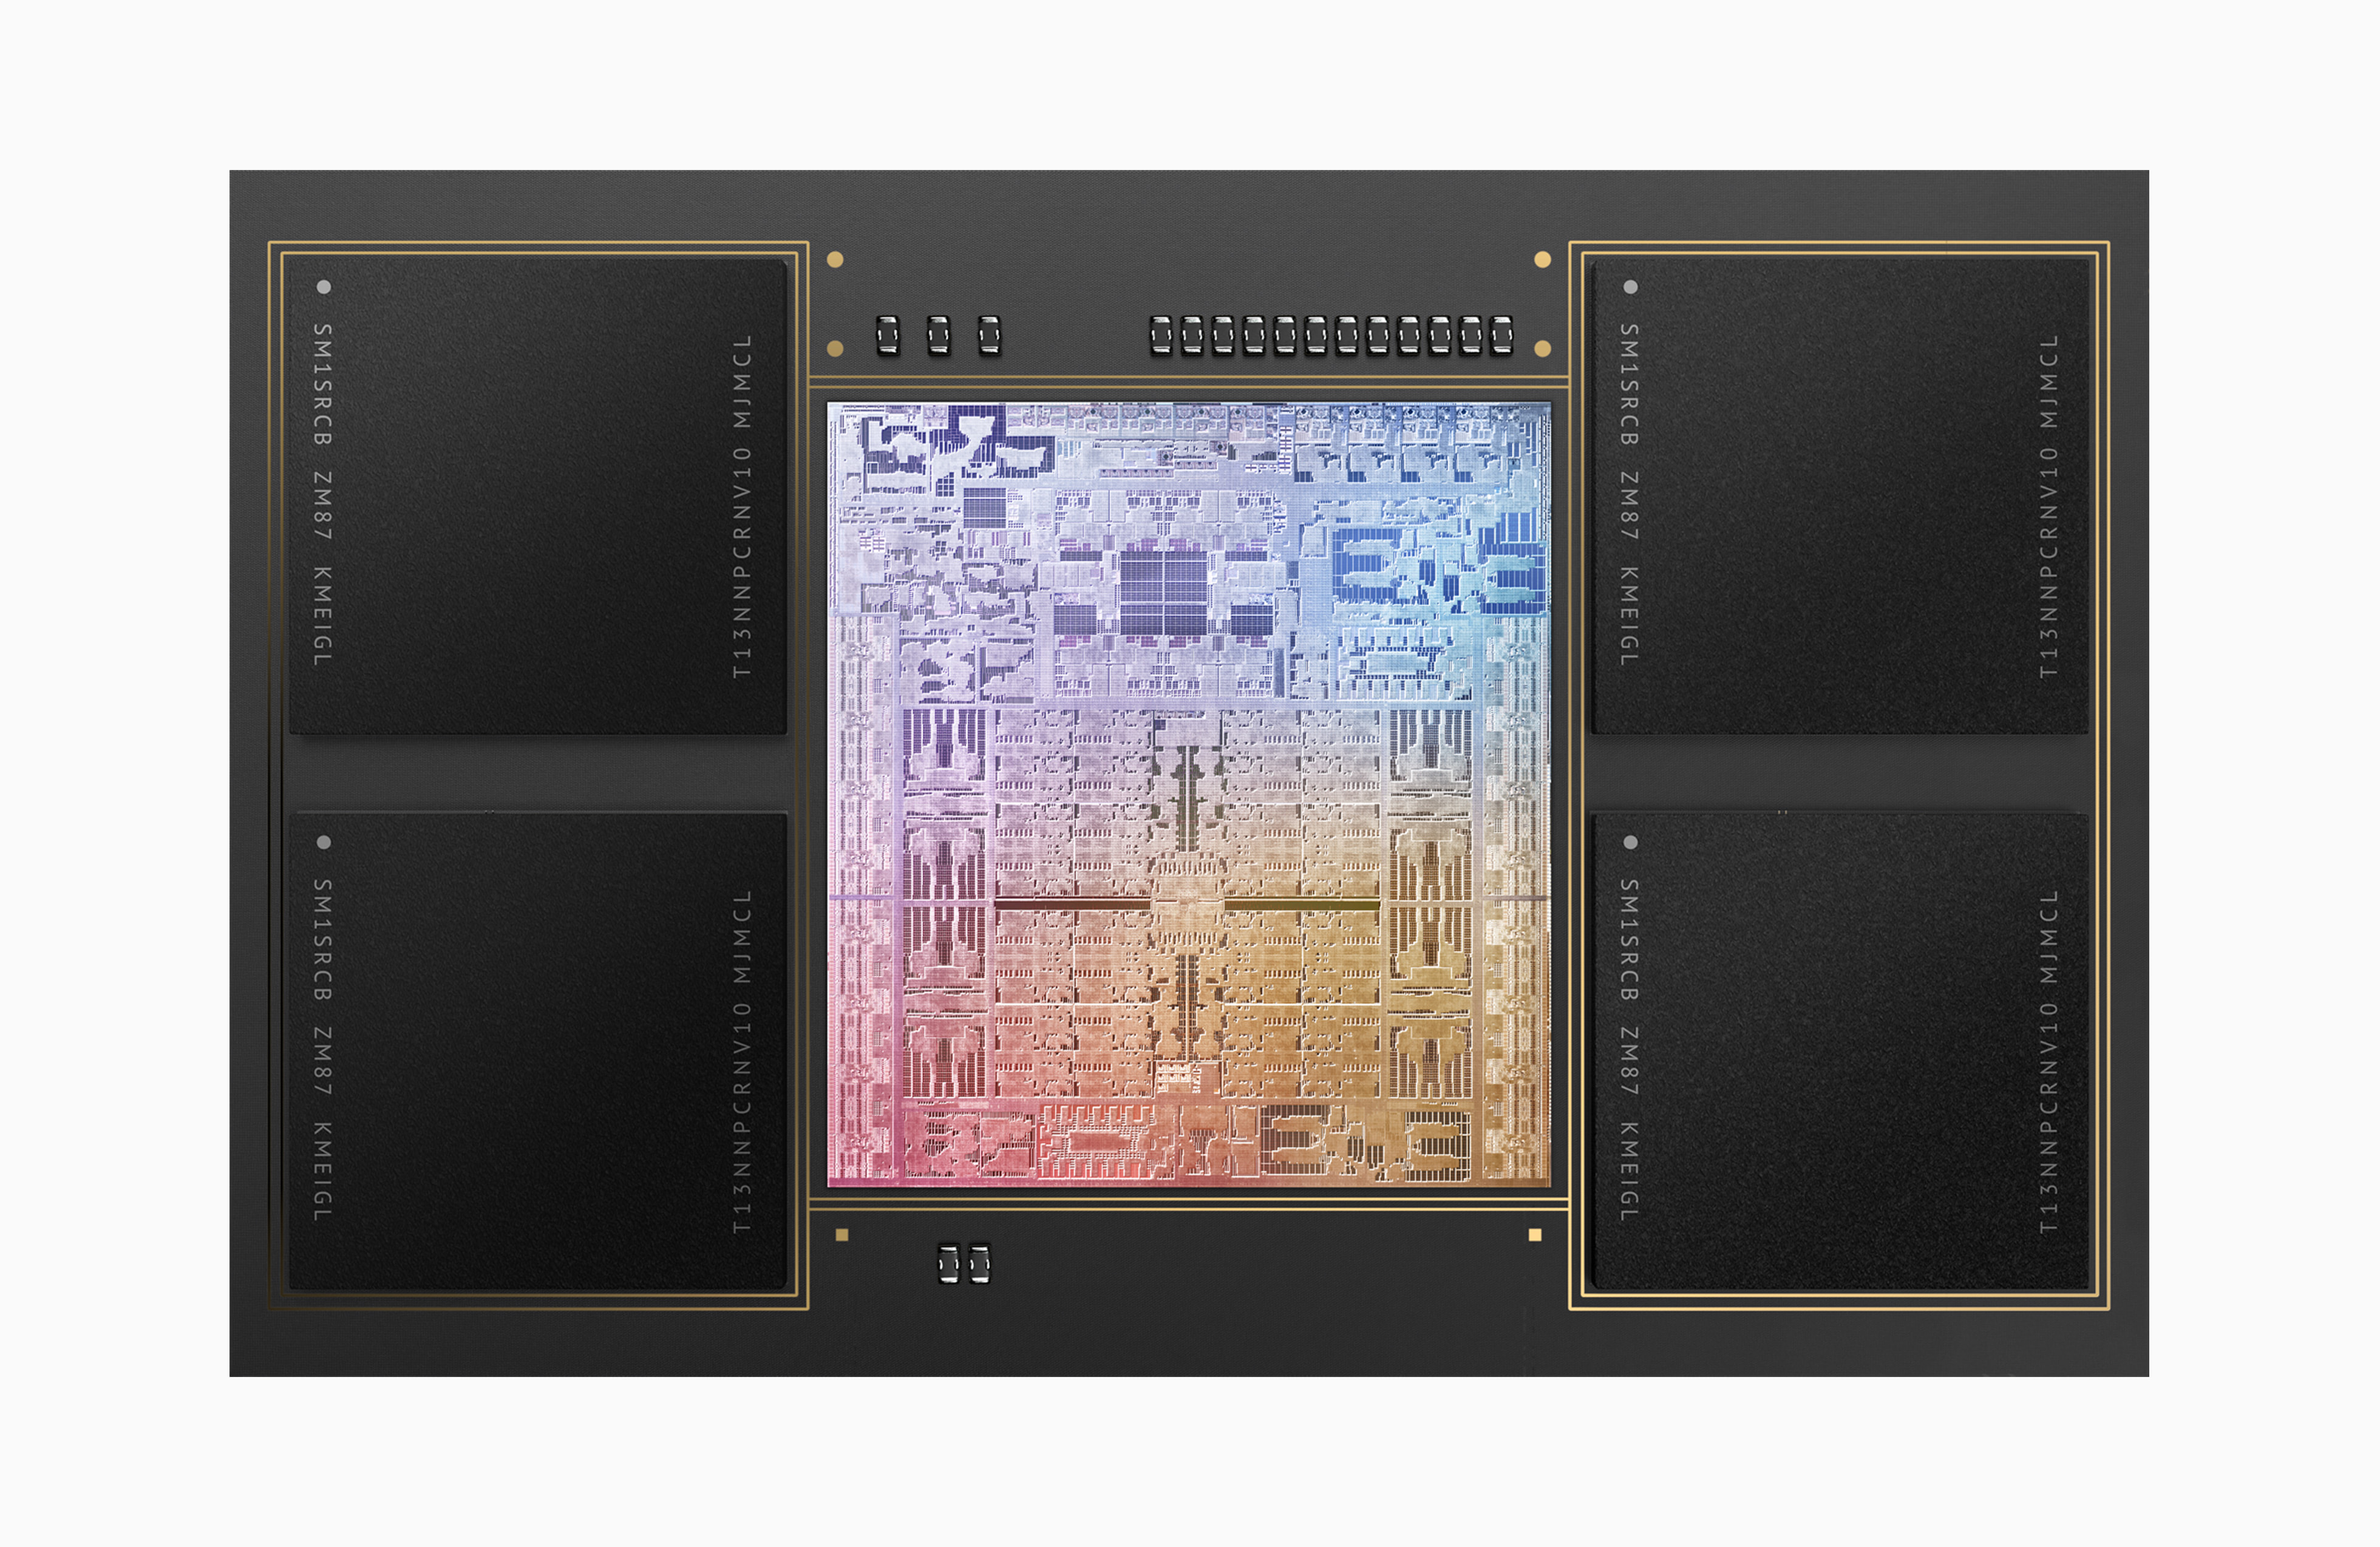 Apple M1 Pro vs. M1 Max: How does each chip perform? - CNET